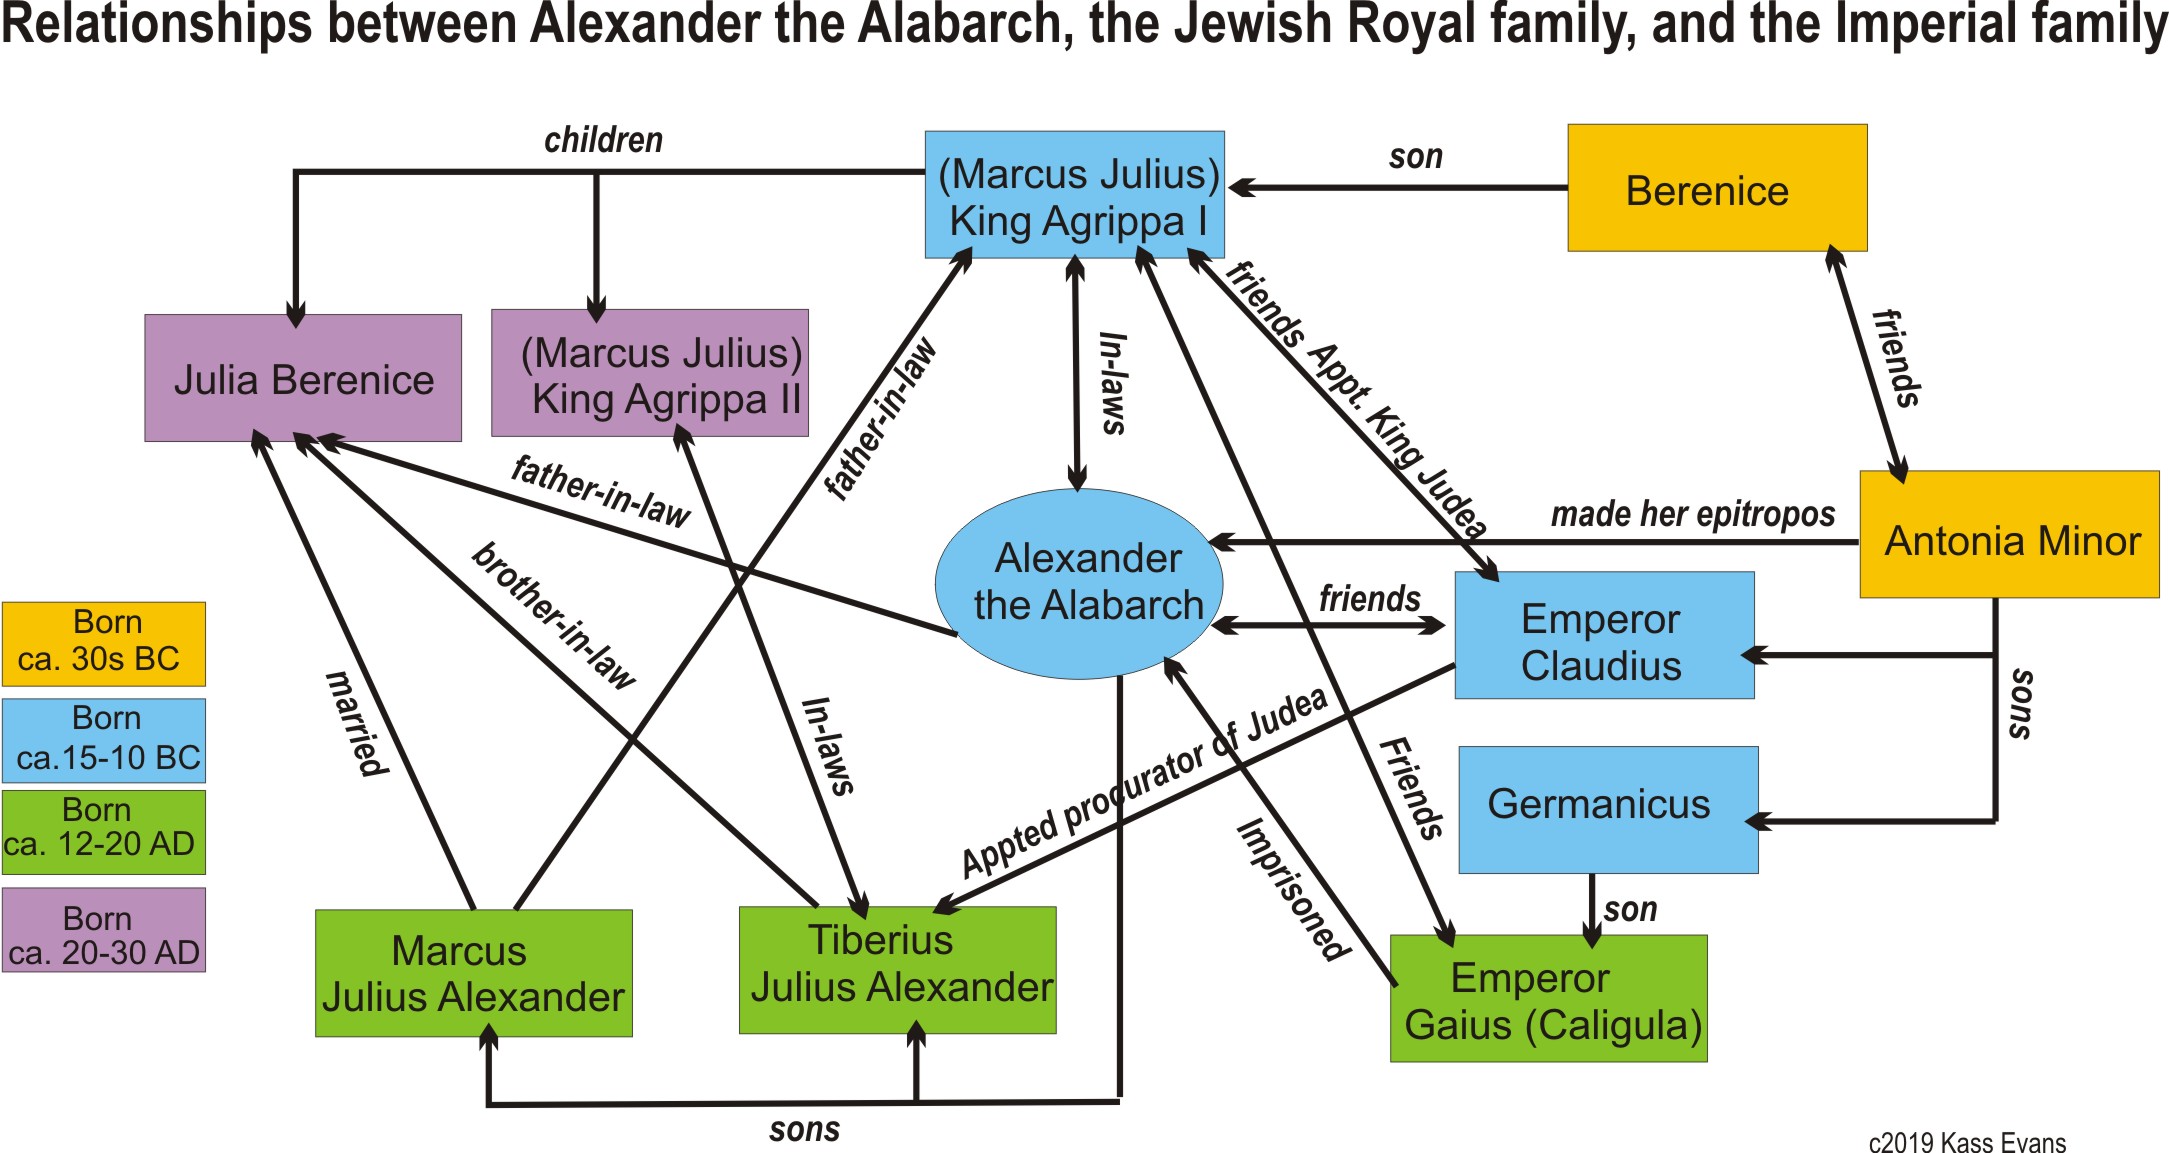 Alexander the Alabarch relationships